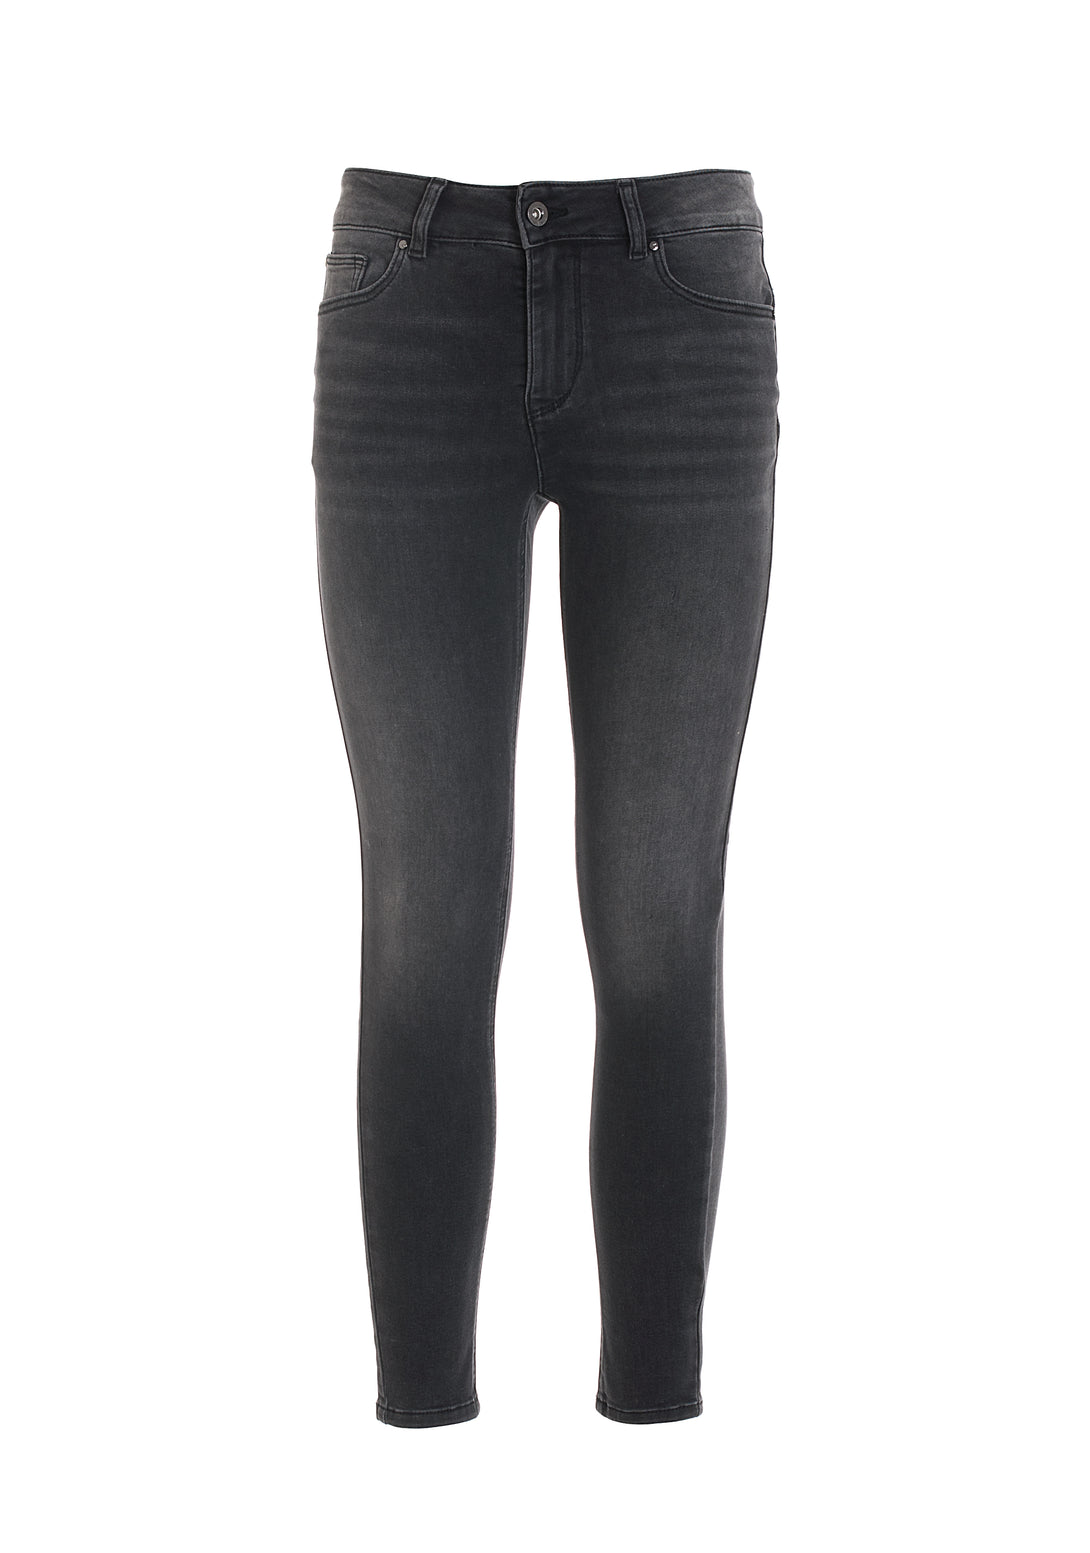 Jeans skinny fit with shape-up effect made in black denim with dark wash